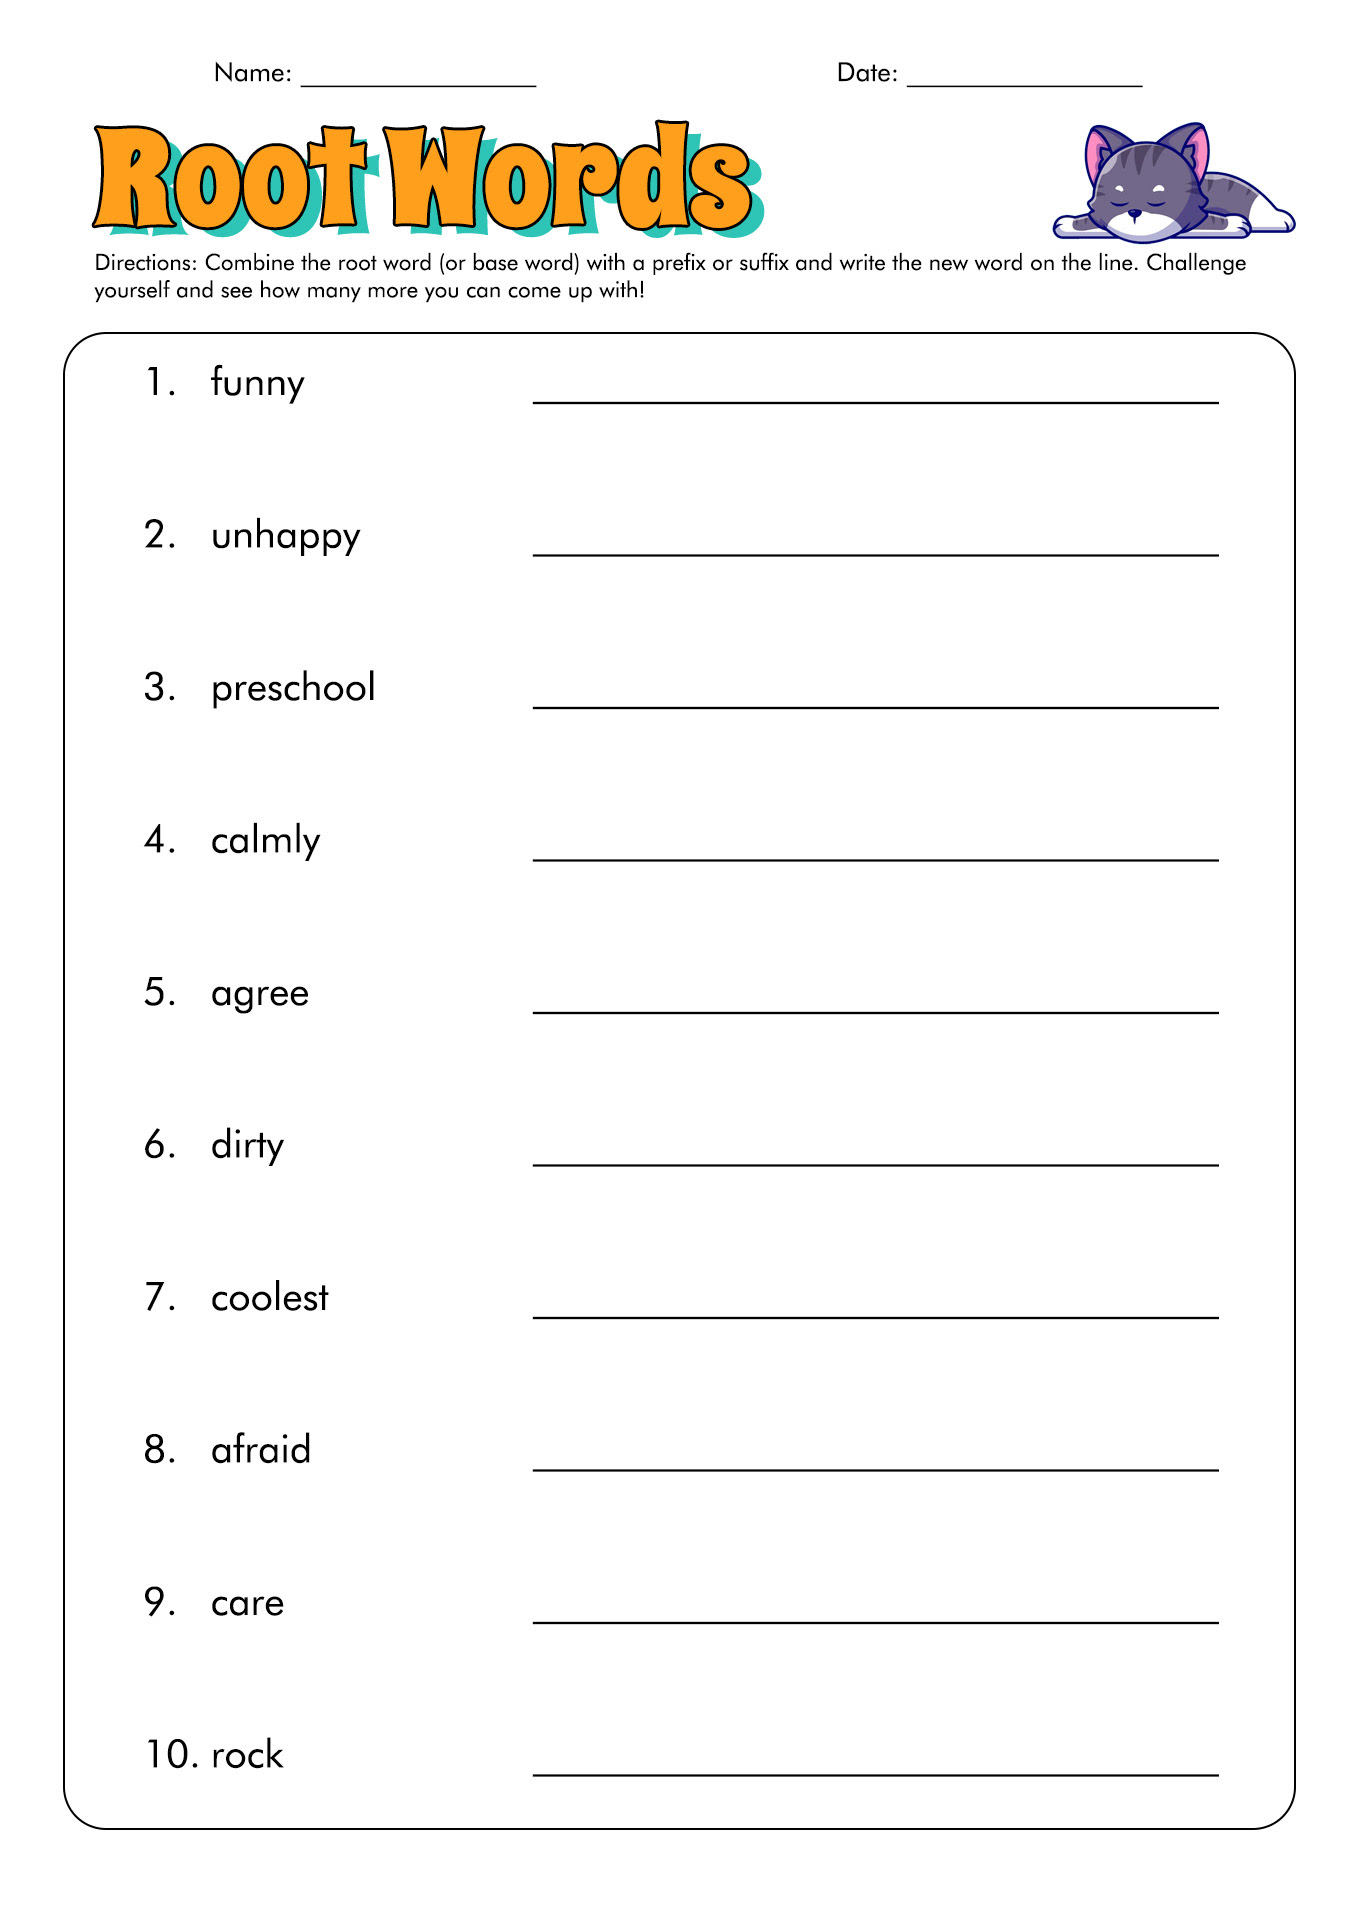 suffix-prefix-5-pages-exercises-and-answers-esl-worksheet-by-suffix-s-ed-ing-worksheet